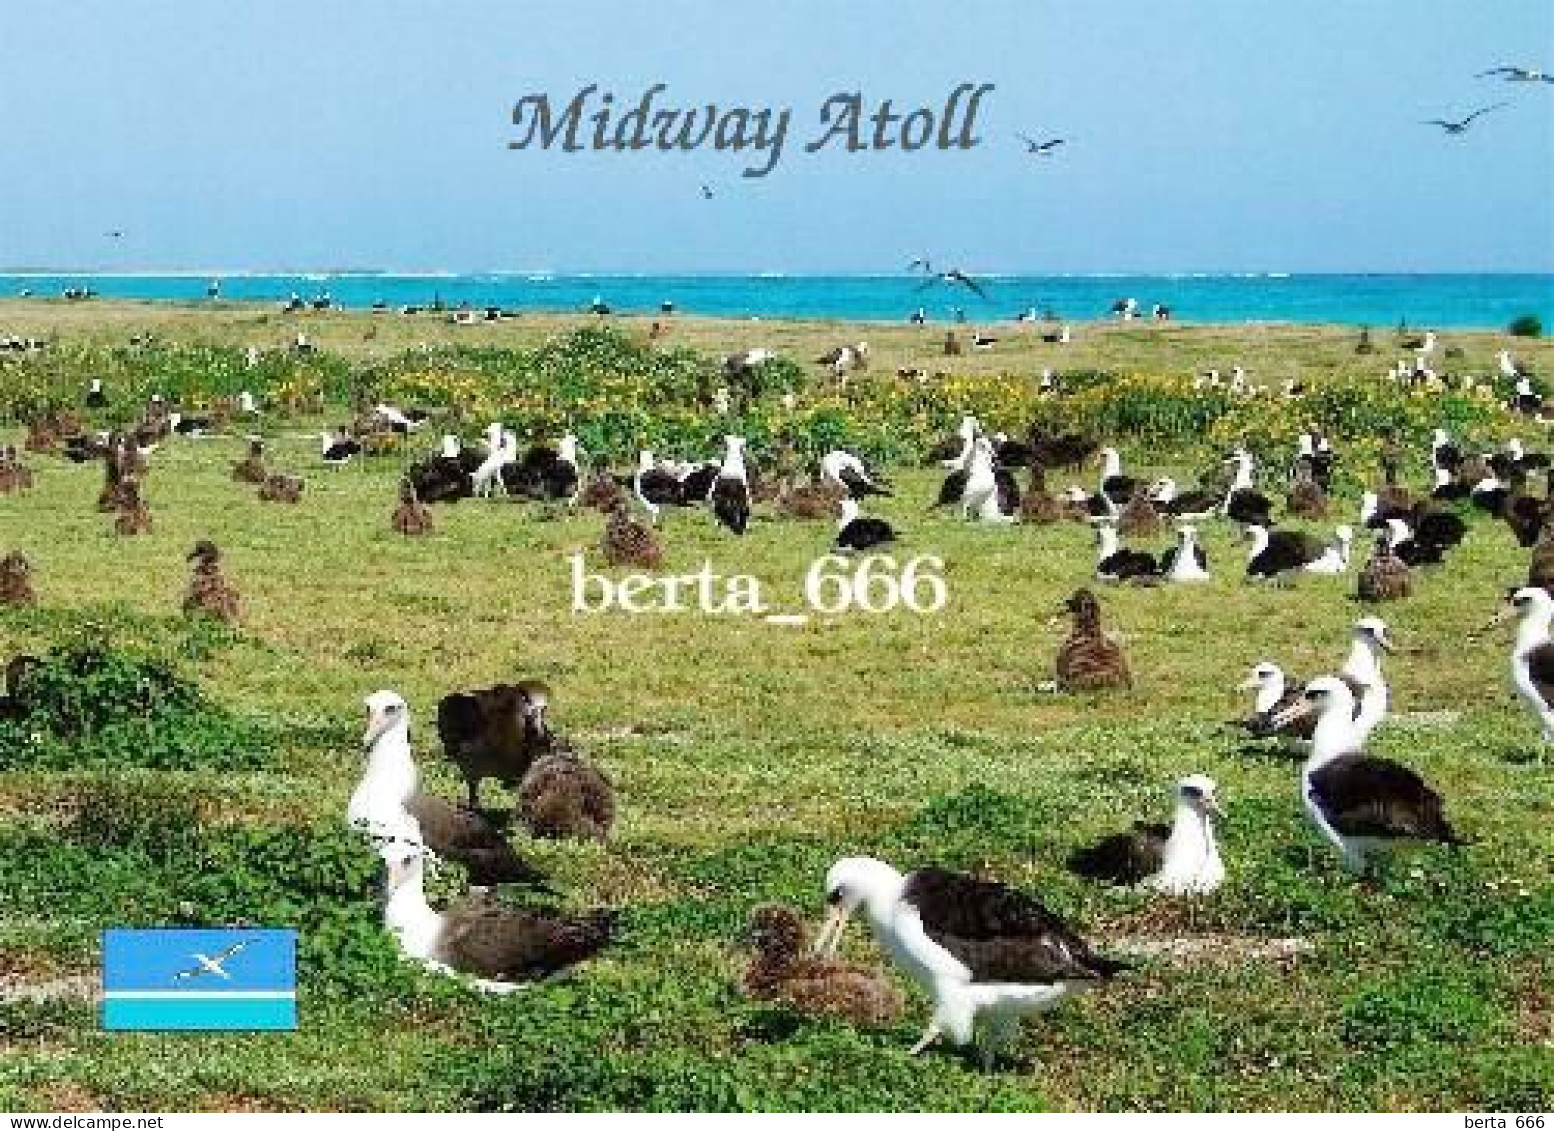 United States Midway Atoll Albatrosses New Postcard - Midway-eilanden